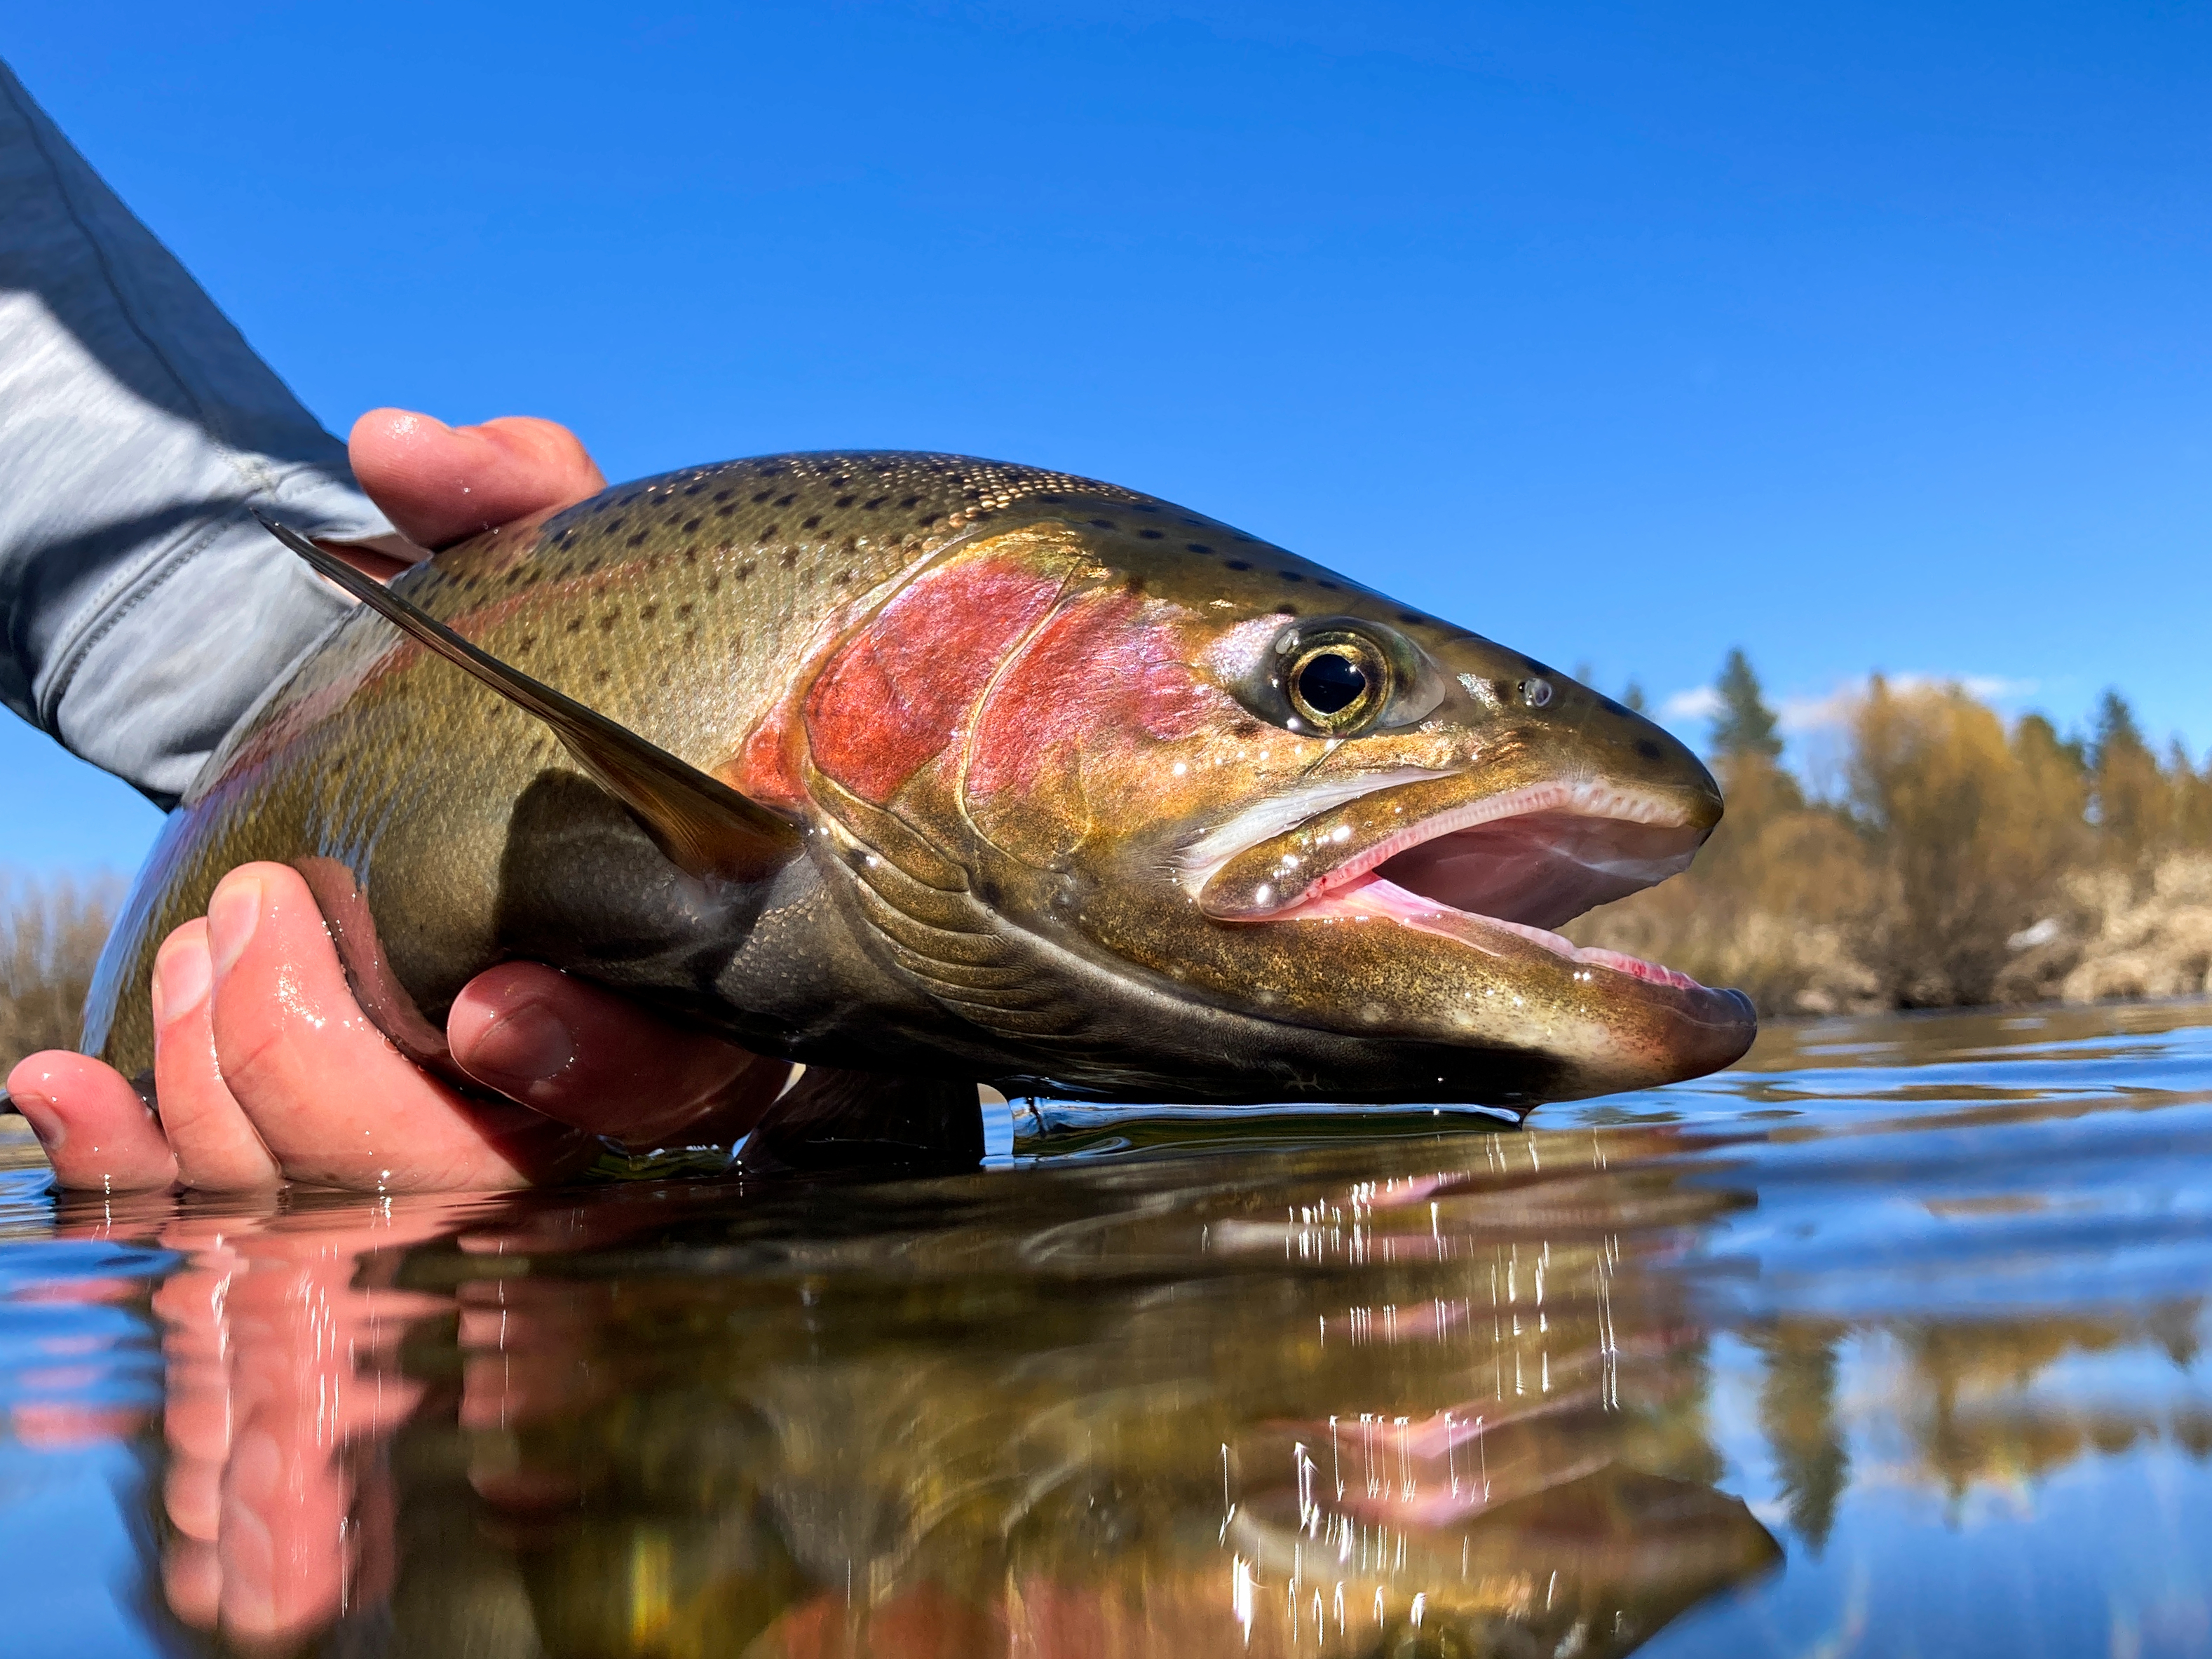 River Trout Fishing: How to Trap Trout in Rivers - The Teaching